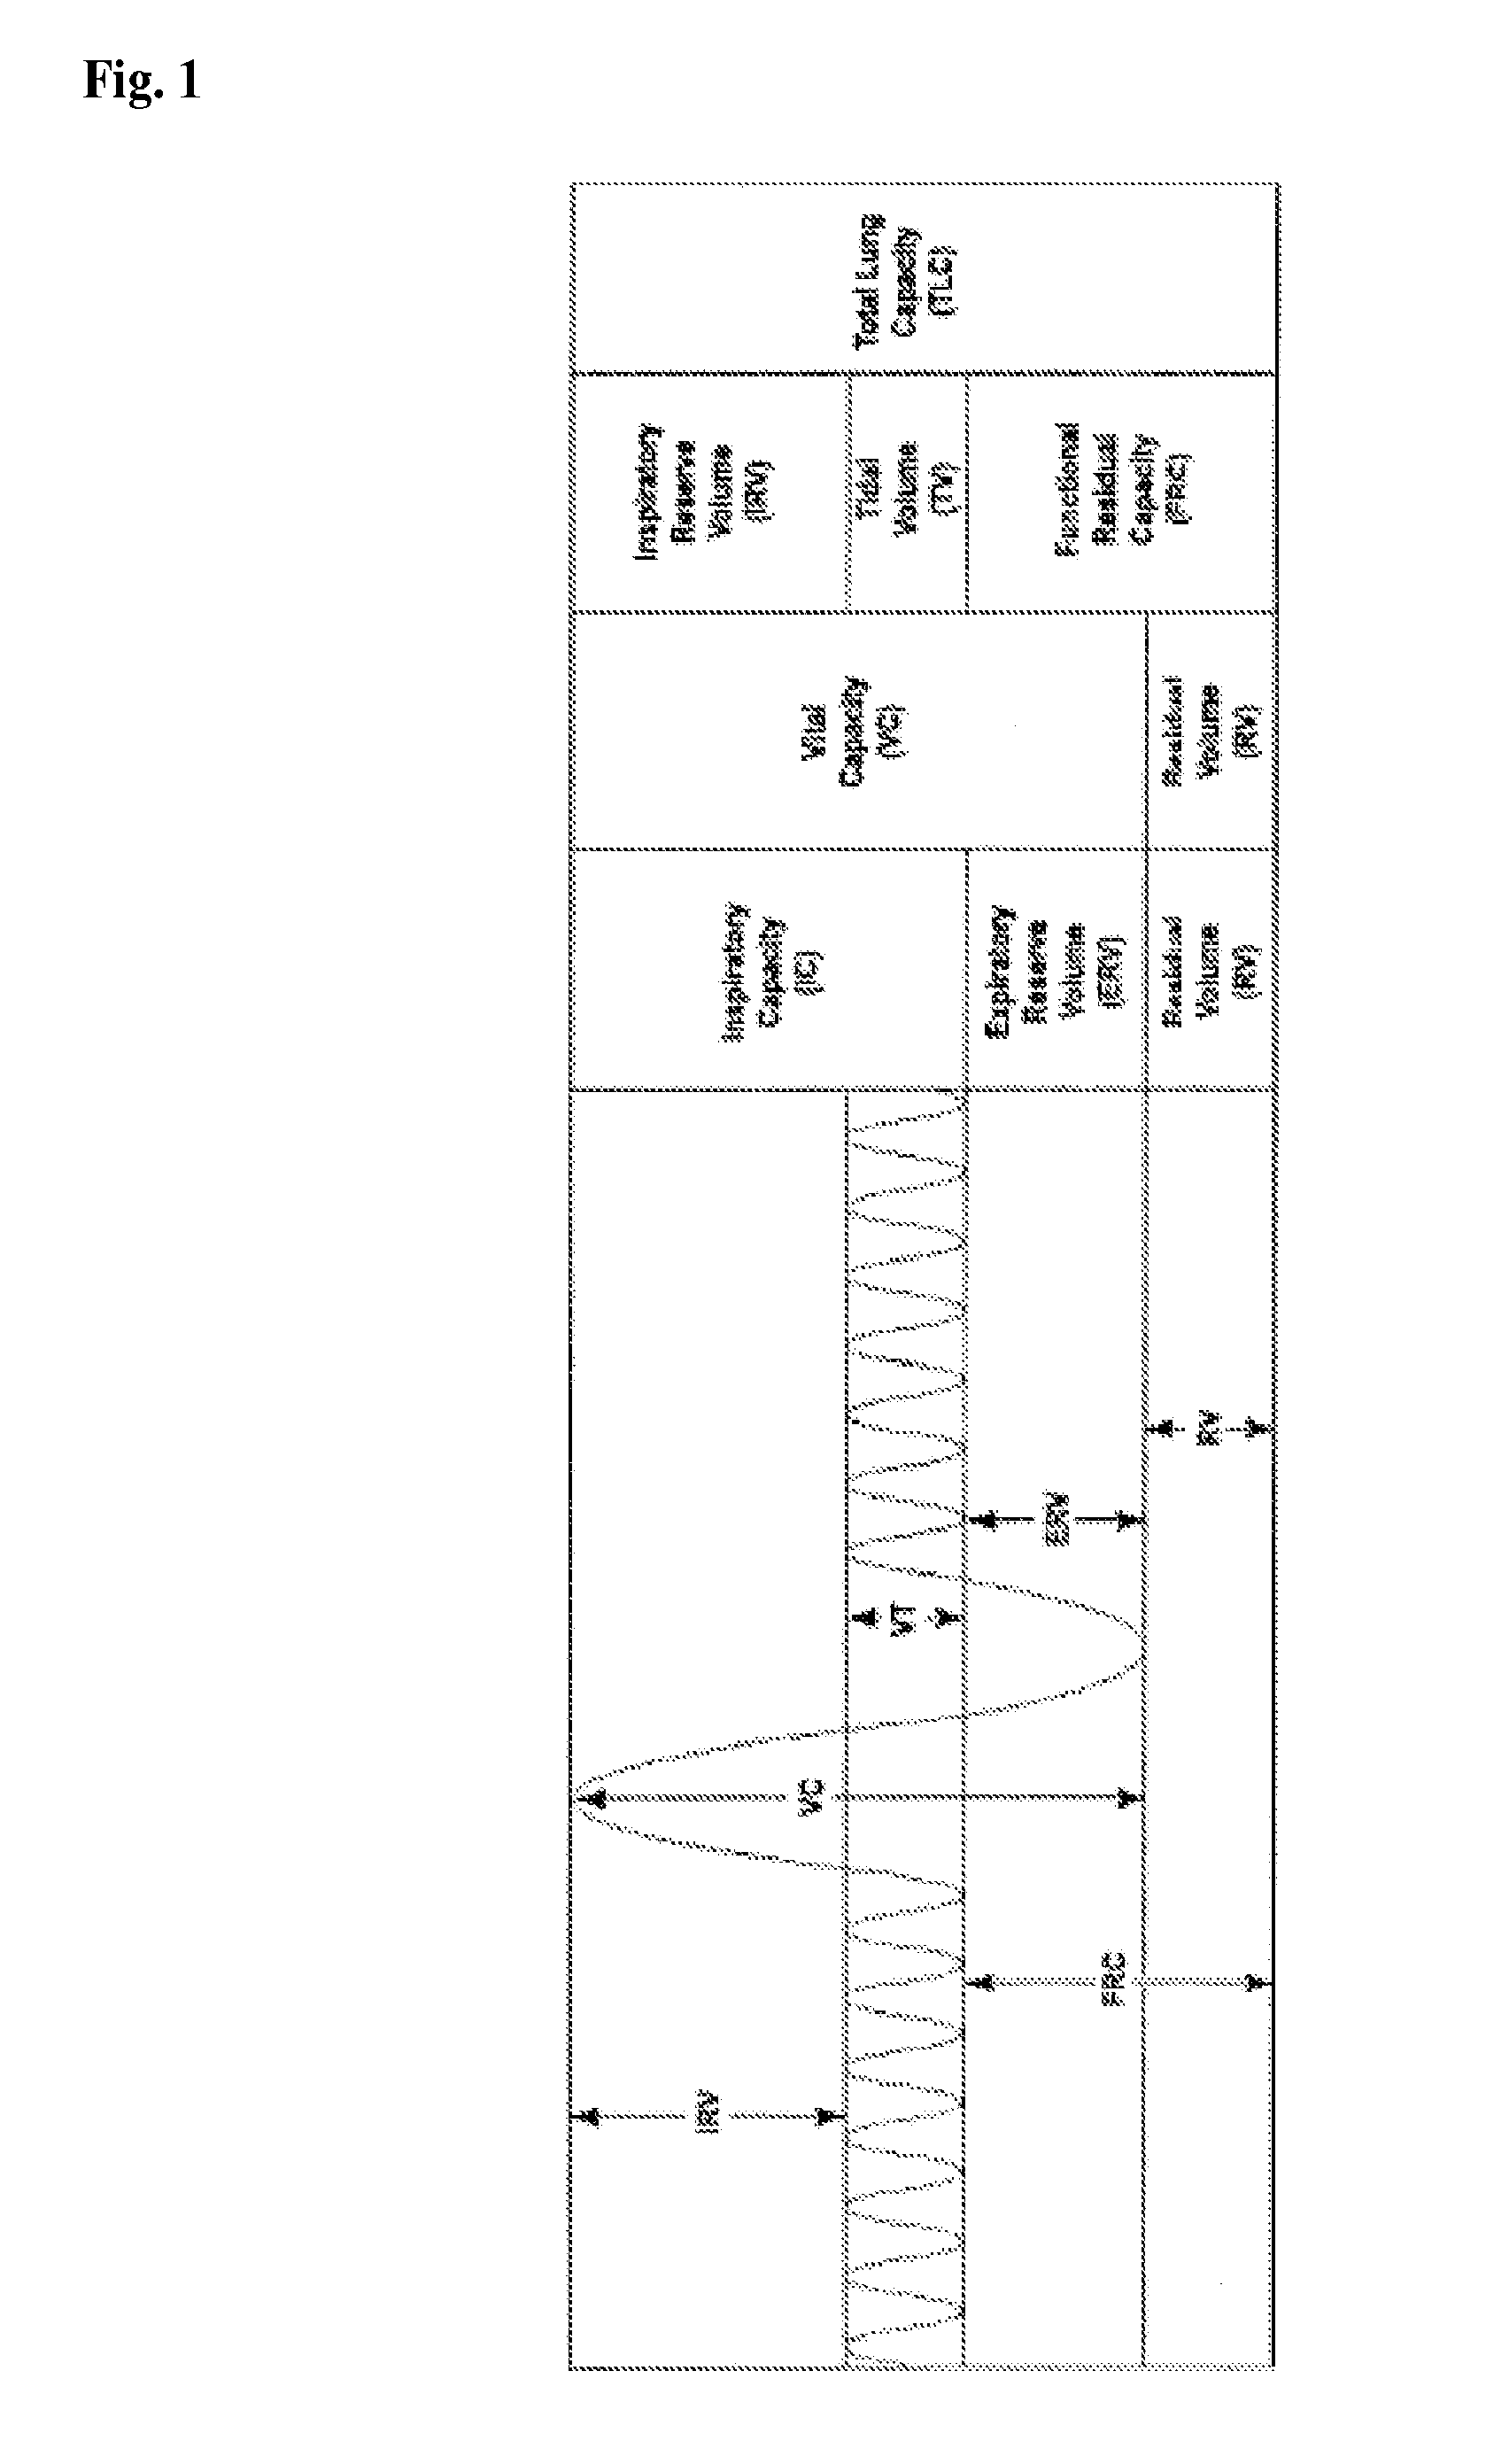 Apparatus and methods for assisting breathing